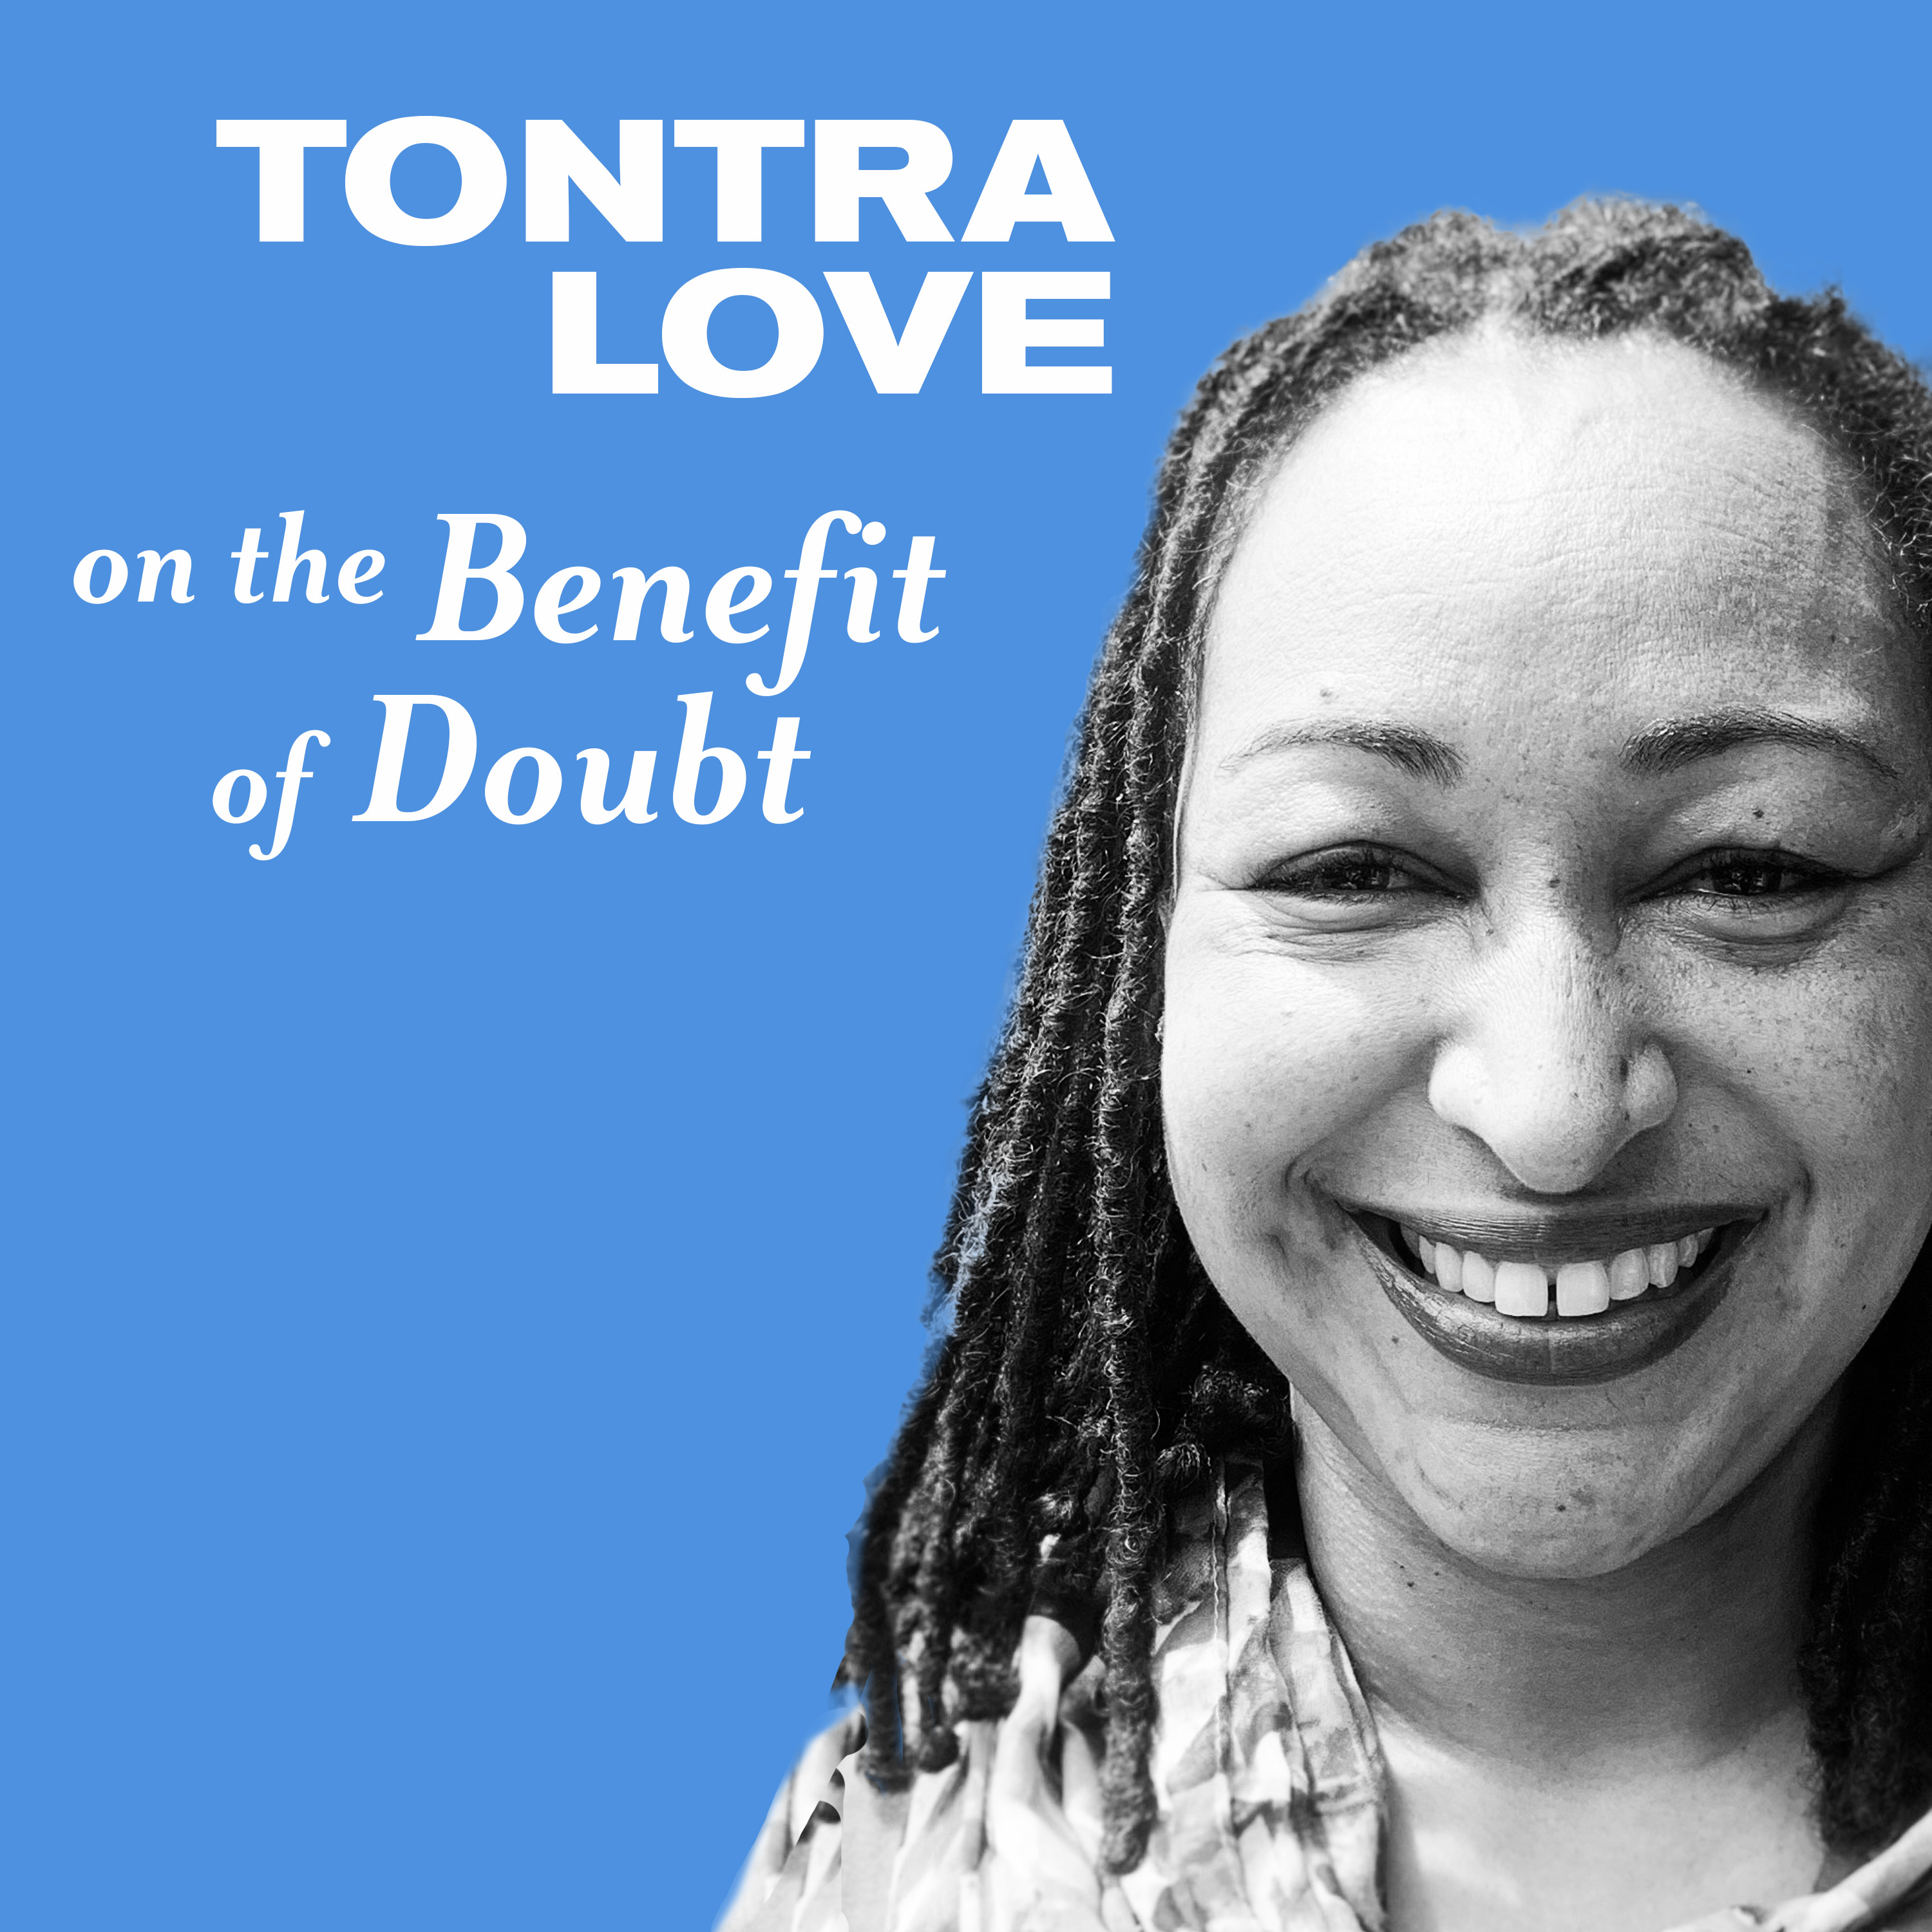 Tontra Love On the Benefit of the Doubt